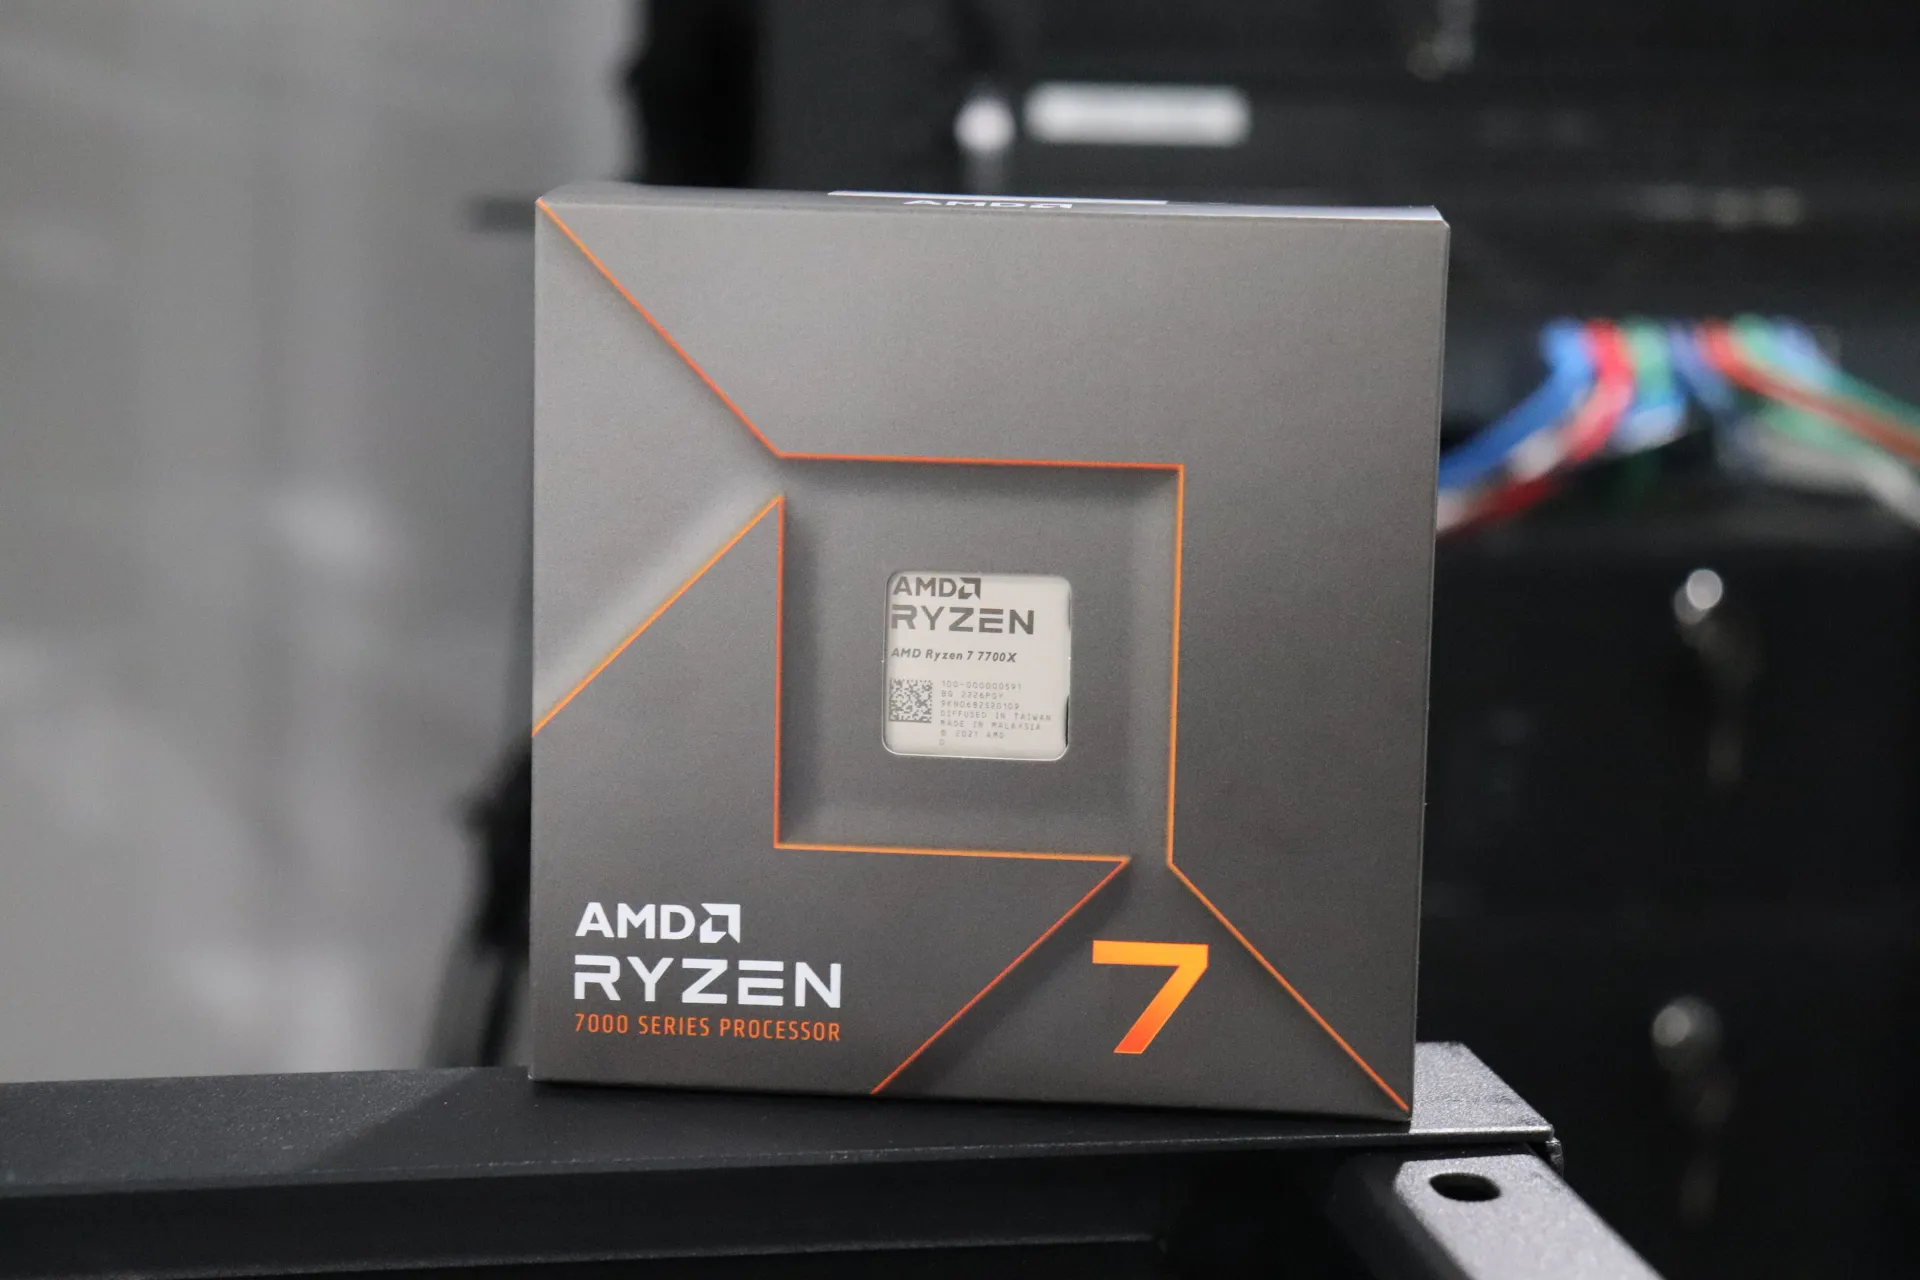 AMD Ryzen 7 7700X review: Performance that's great but a price